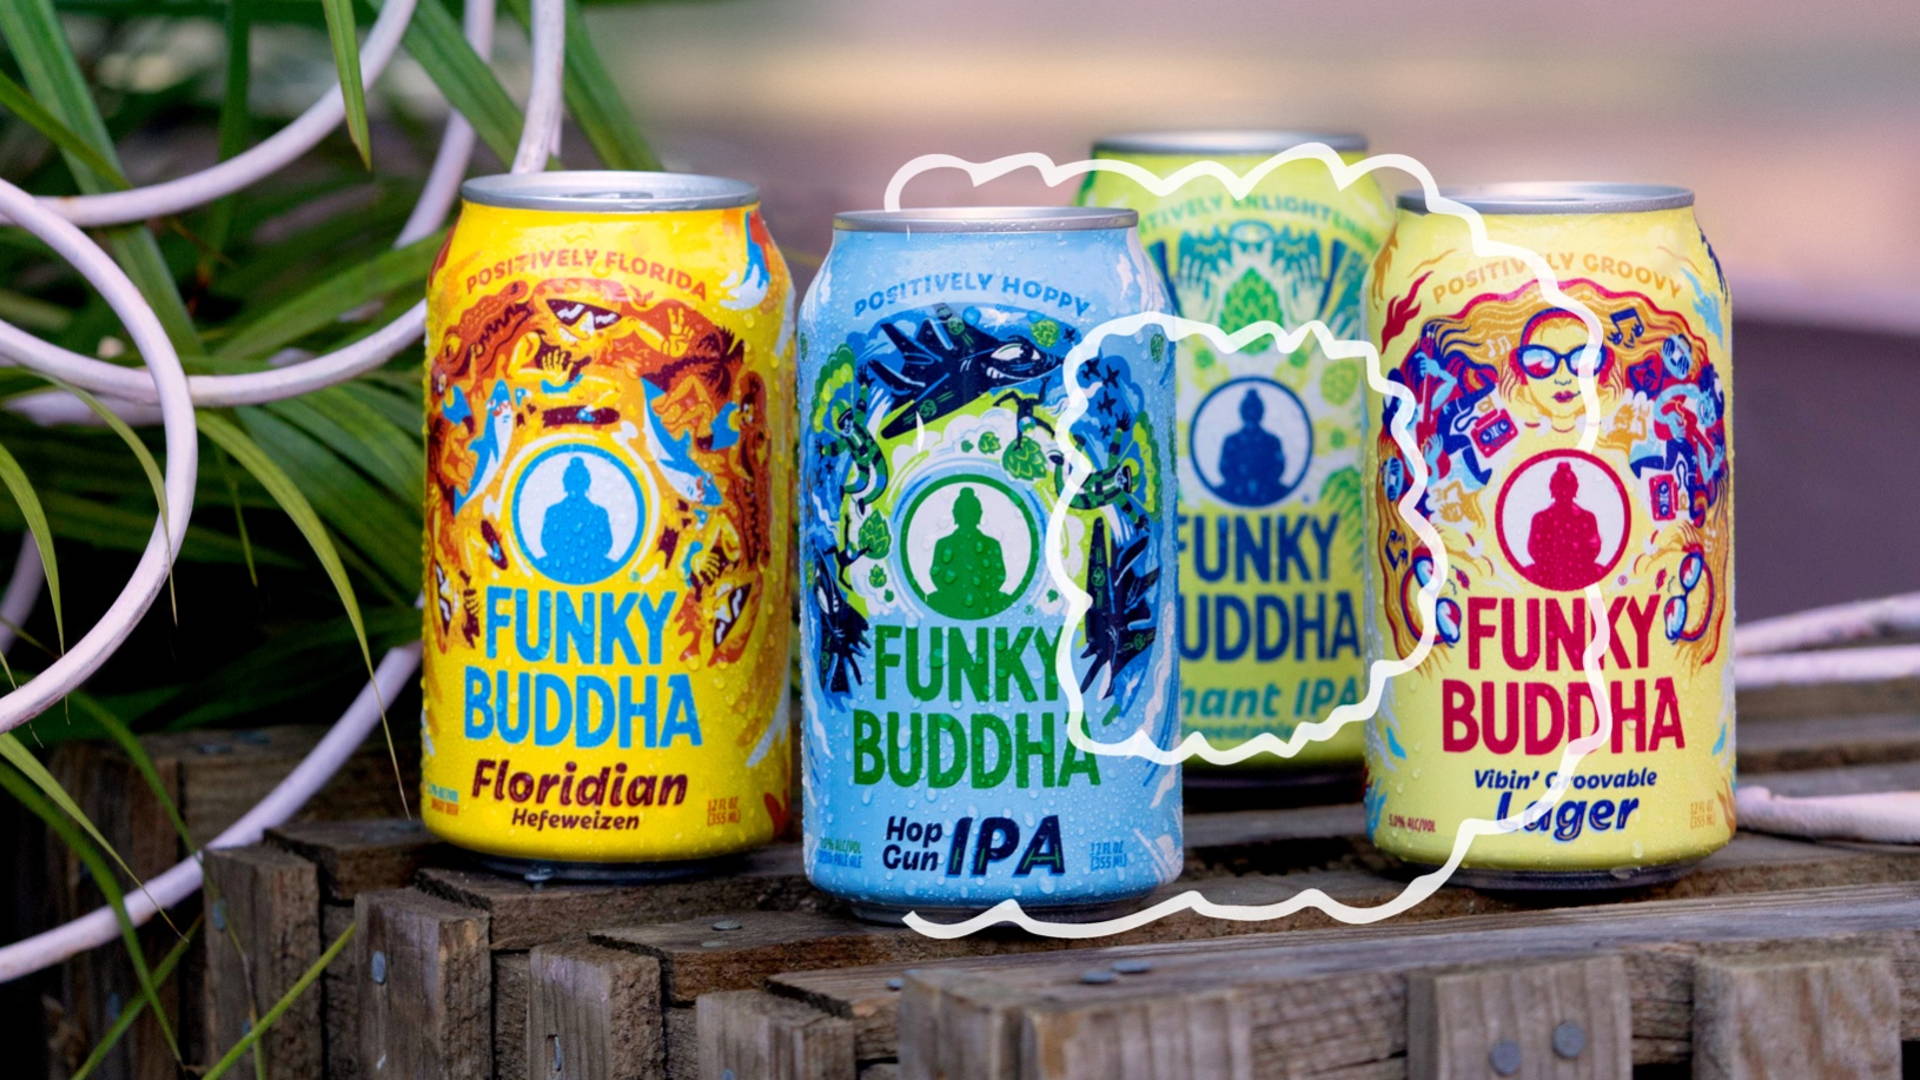 Featured image for Same, Same, But Different: Bringing Unified Uniqueness to the Funky Buddha Line of Beers and Hard Seltzers